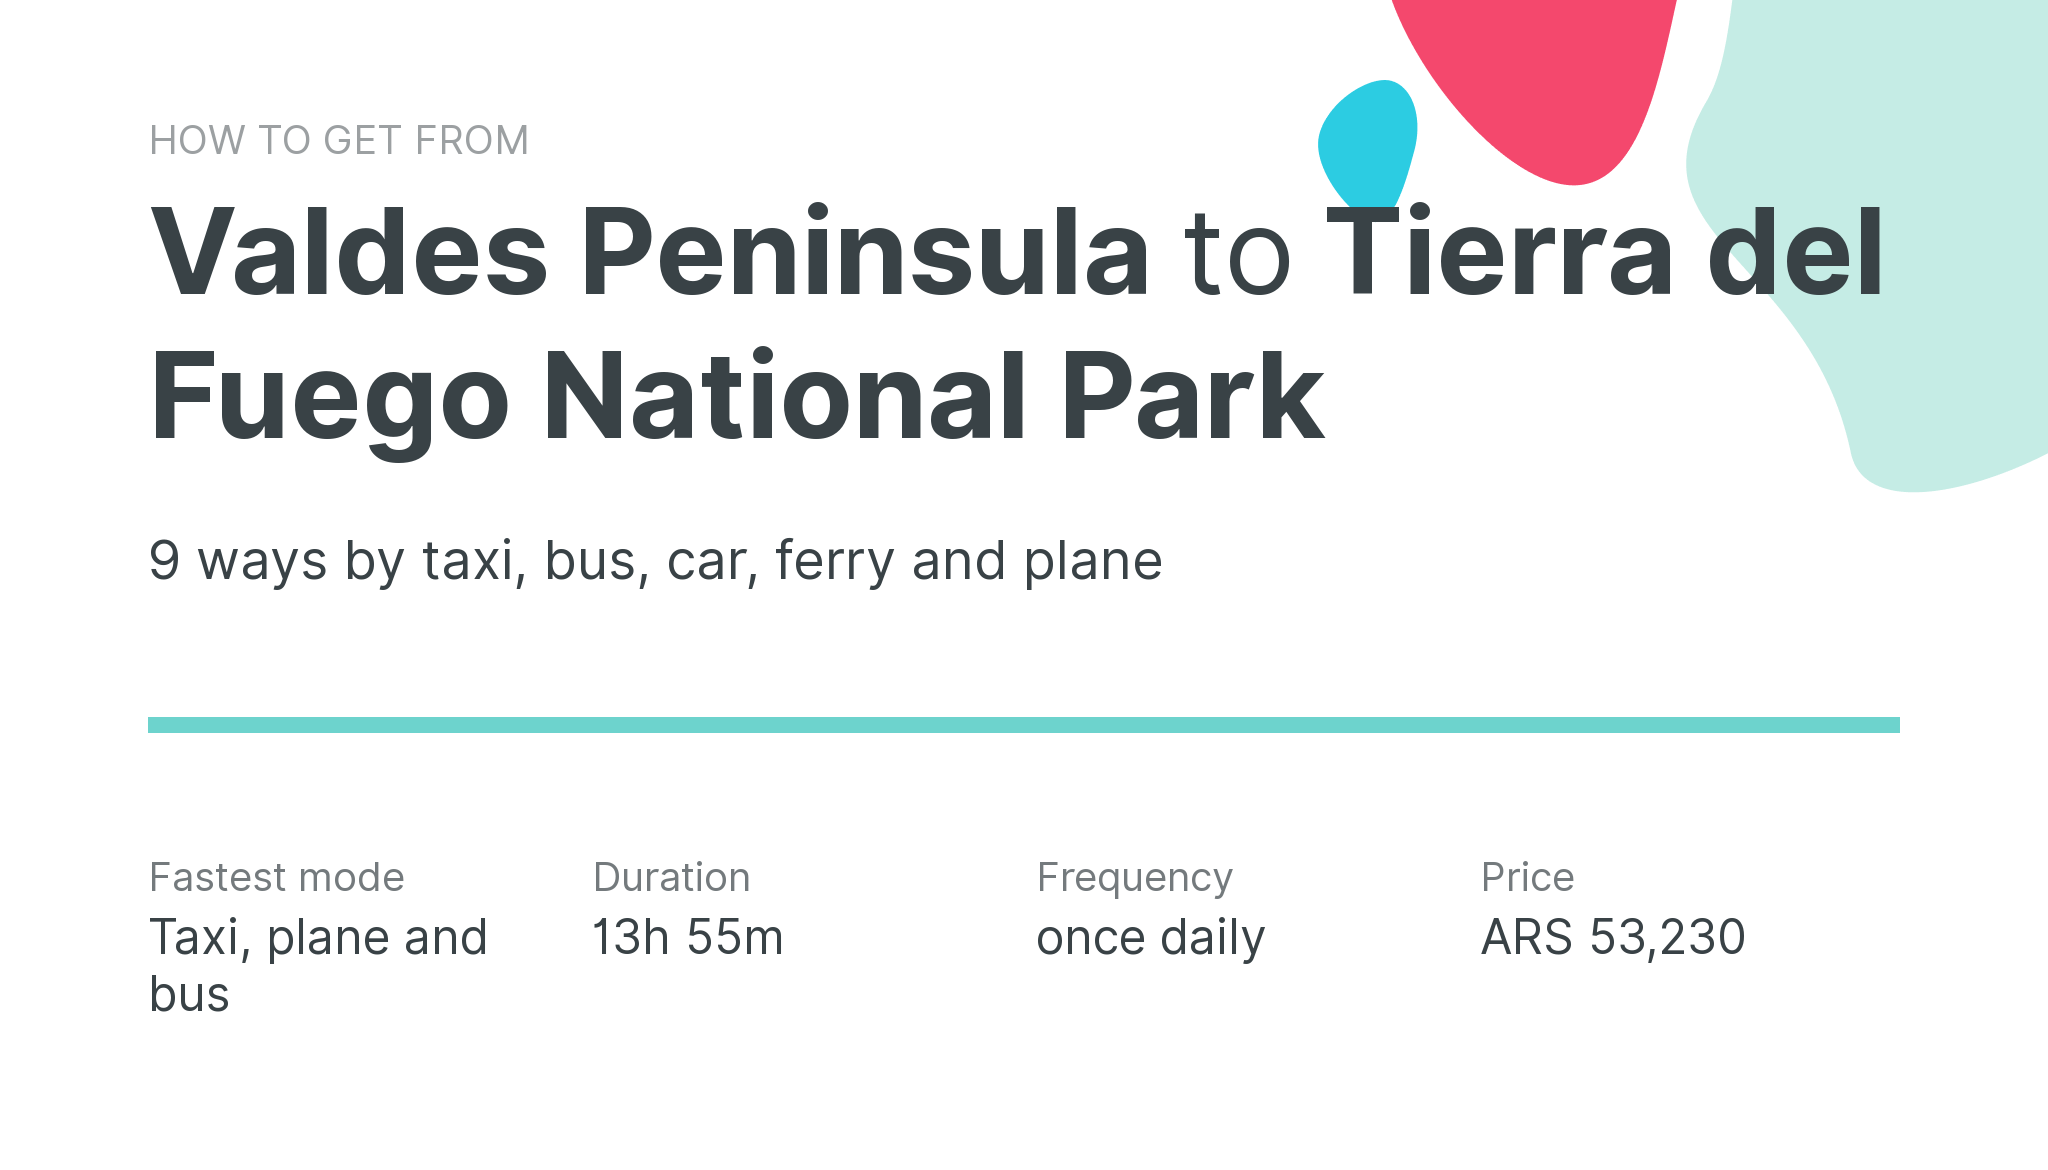 How do I get from Valdes Peninsula to Tierra del Fuego National Park